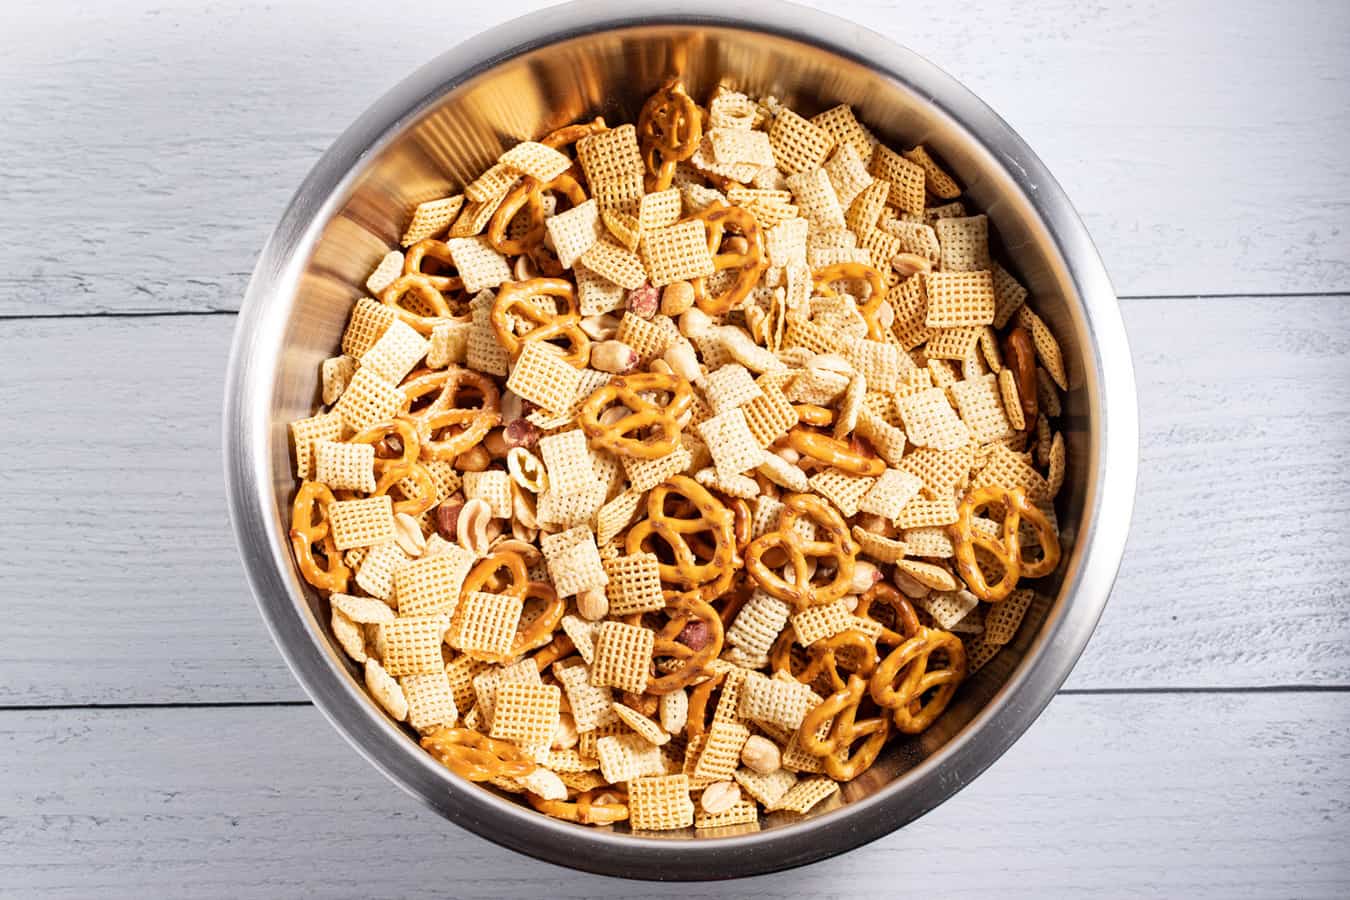 Bowl of dry Chex mix.